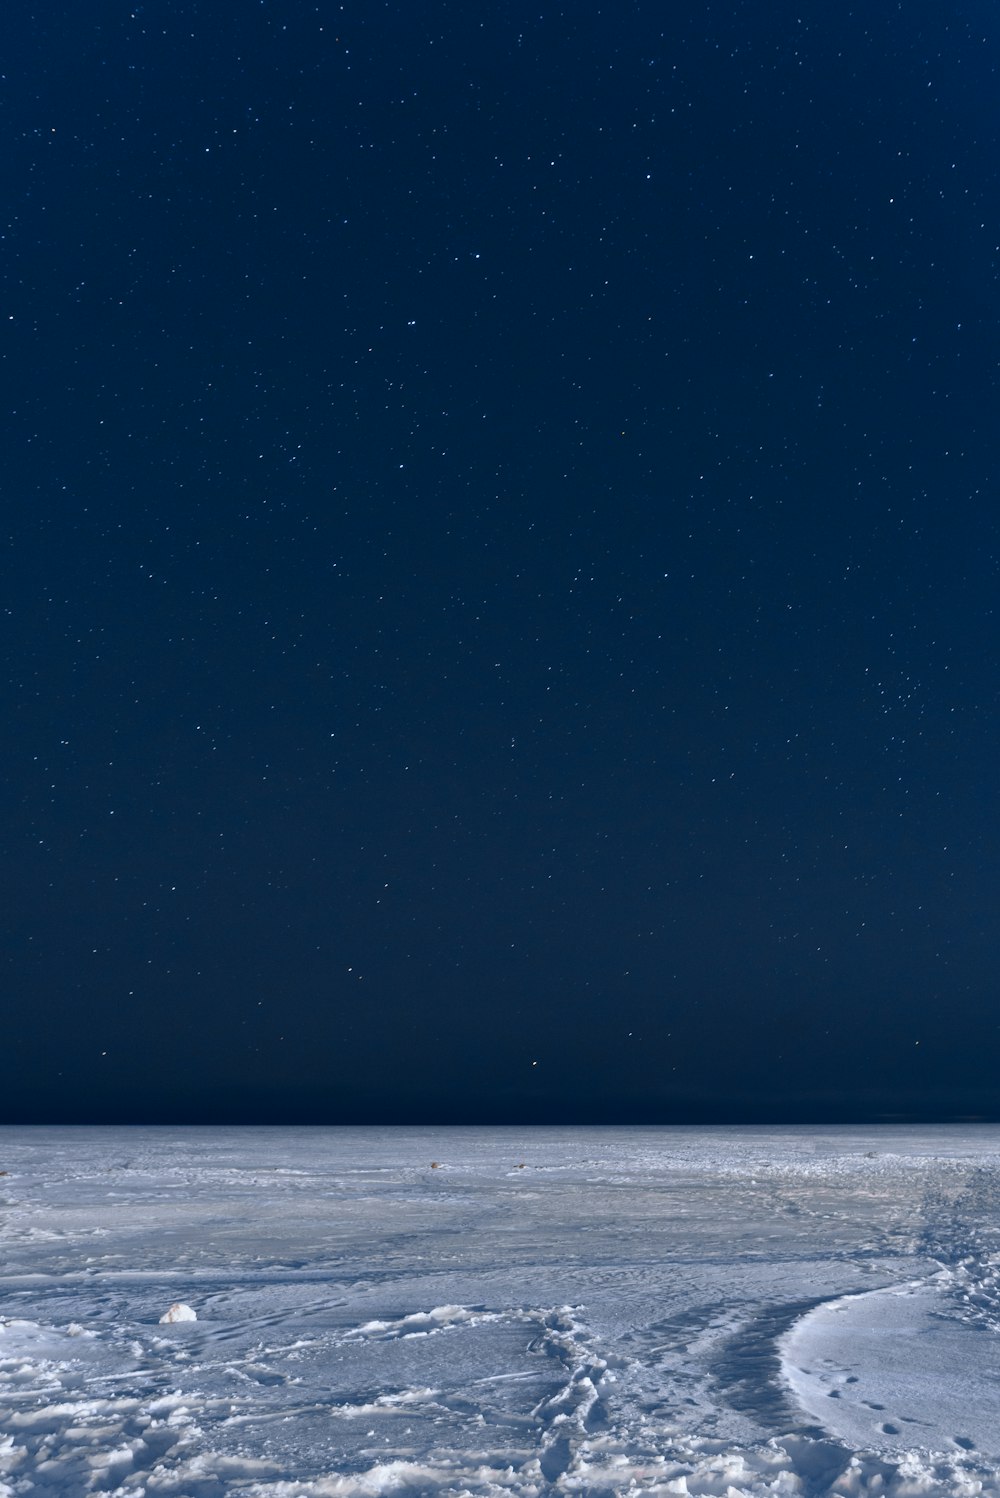 the night sky is full of stars above a vast expanse of snow